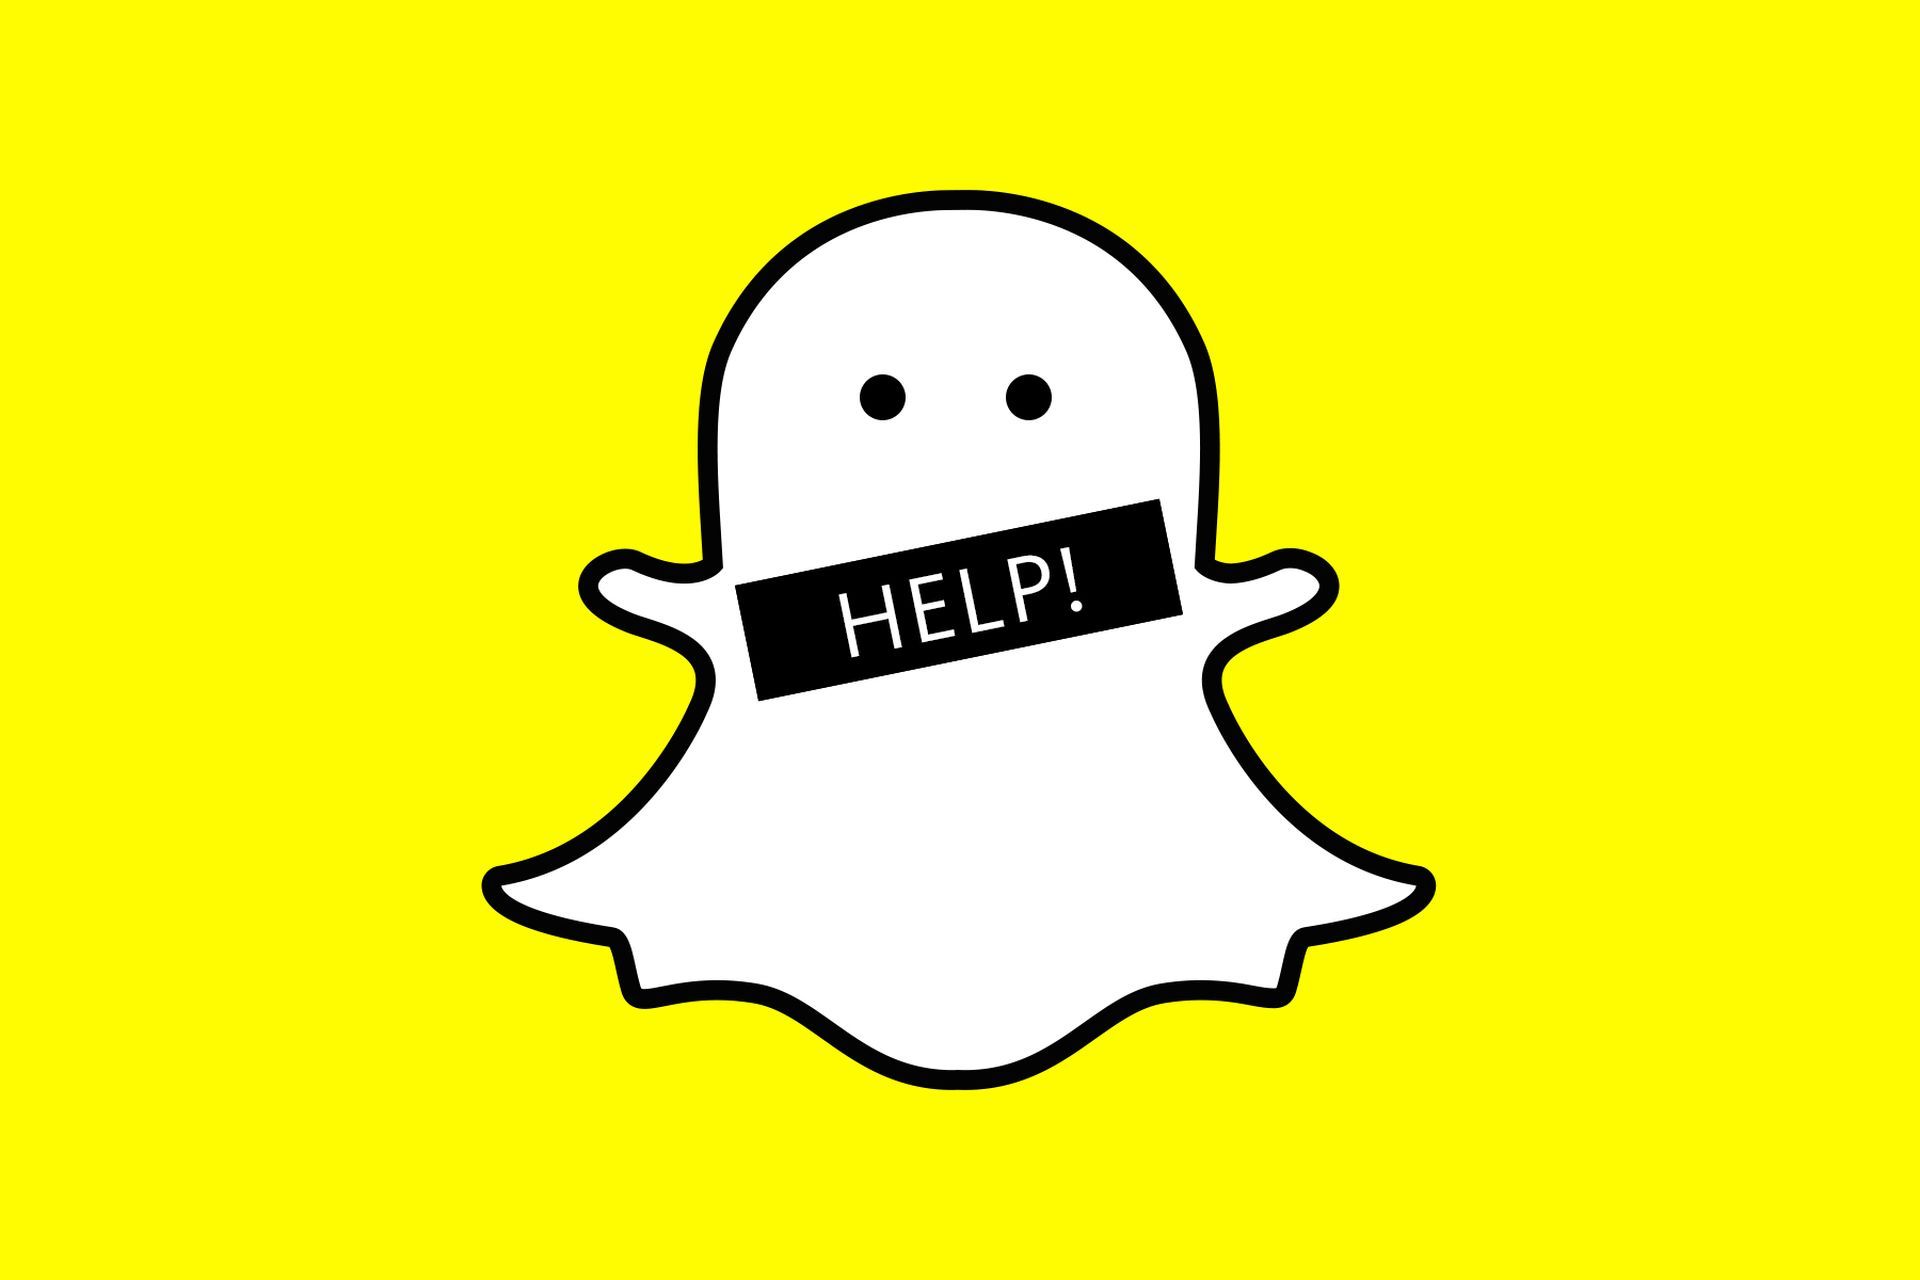 Snapchat Games disappeared: How to fix it?